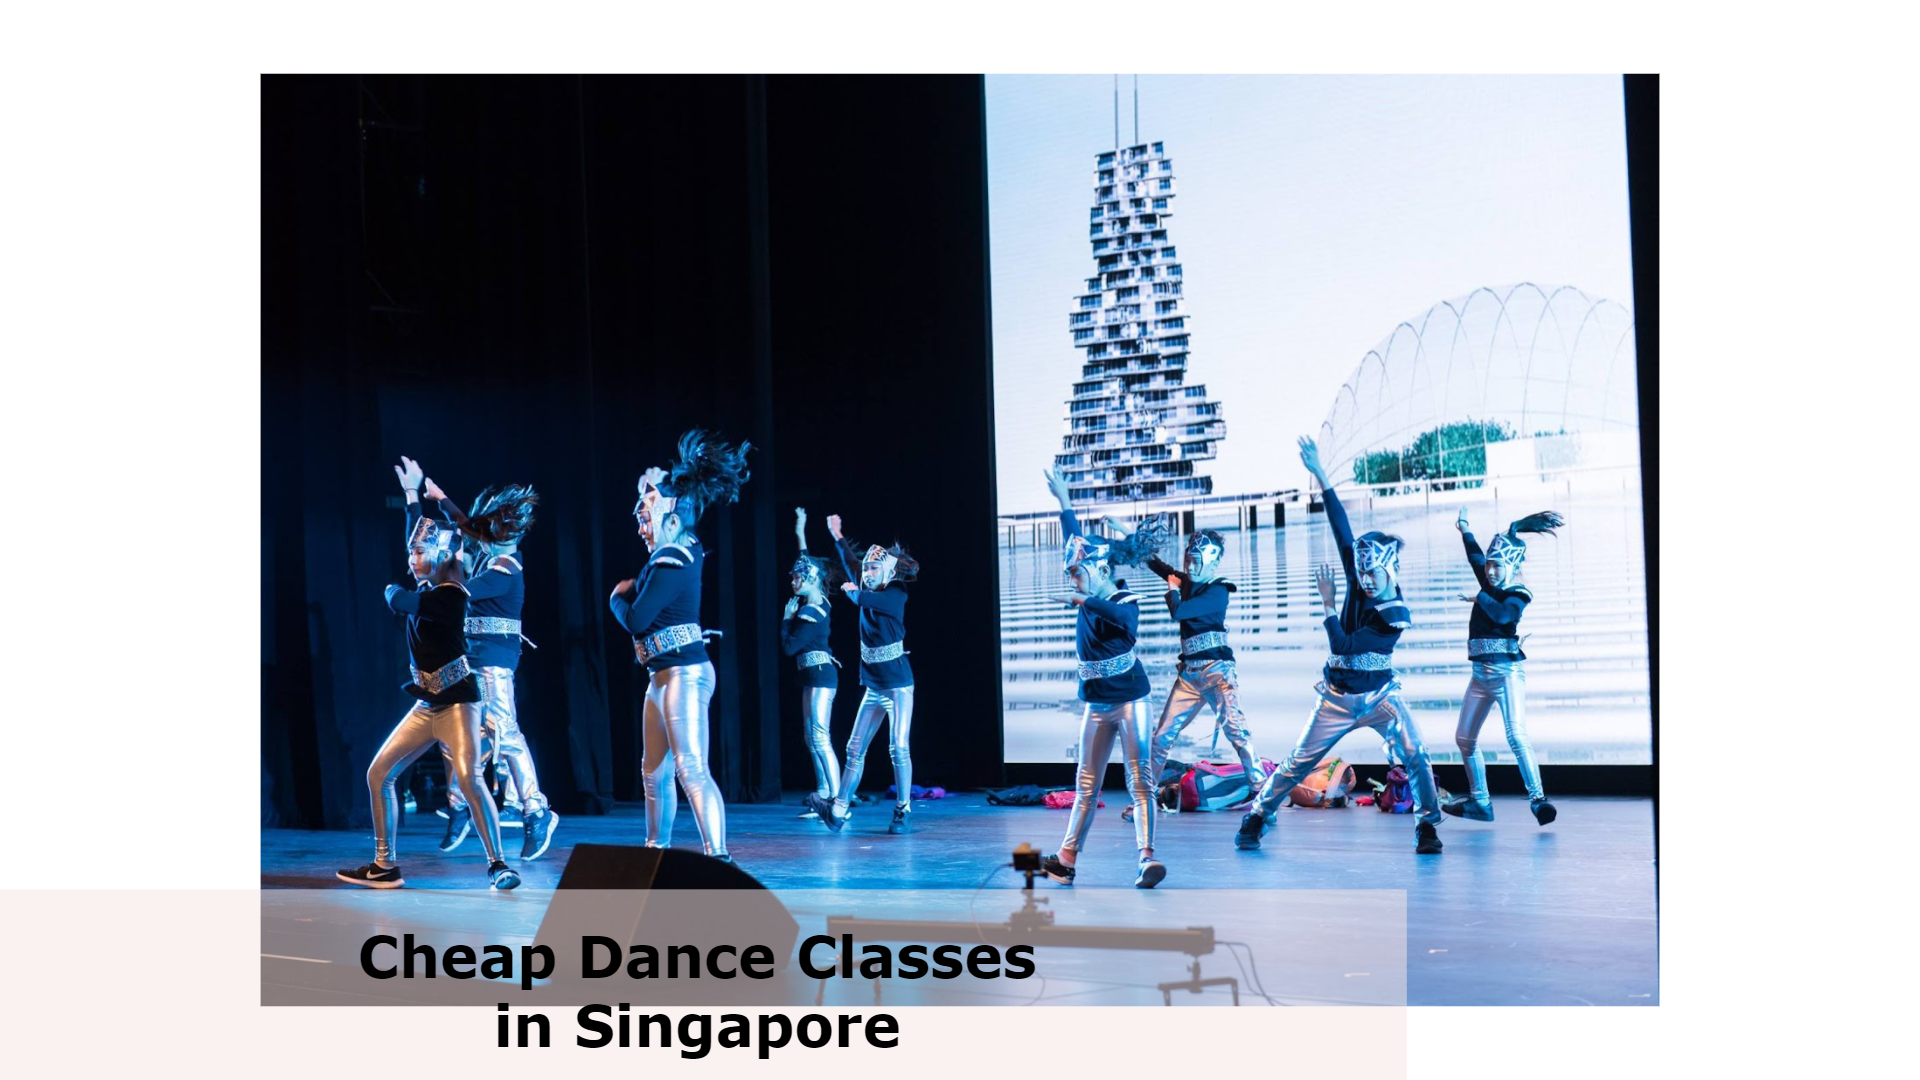 DF Academy - Cheap Dance Classes in Singapore, Cheap Dance Classes Singapore, How much is a dance class in Singapore?, Where can I practice dance in Singapore?, How can I learn to dance in Singapore?, How do I become a Kpop dance crew member in Singapore?, Hip-hop dance classes for beginners, Dance Studios In Singapore With Dance Classes, beginner dance classes for adults singapore, free dance classes singapore, private dance classes singapore, hip hop dance classes singapore, beginner dance classes singapore, dance class singapore, kpop dance class singapore, latin dance classes singapore, Is 40 too old to learn to dance?, How should a beginner start dancing?, Can I learn dance at 27?, How can I start learning dancing?, Can I learn dance by myself?, 